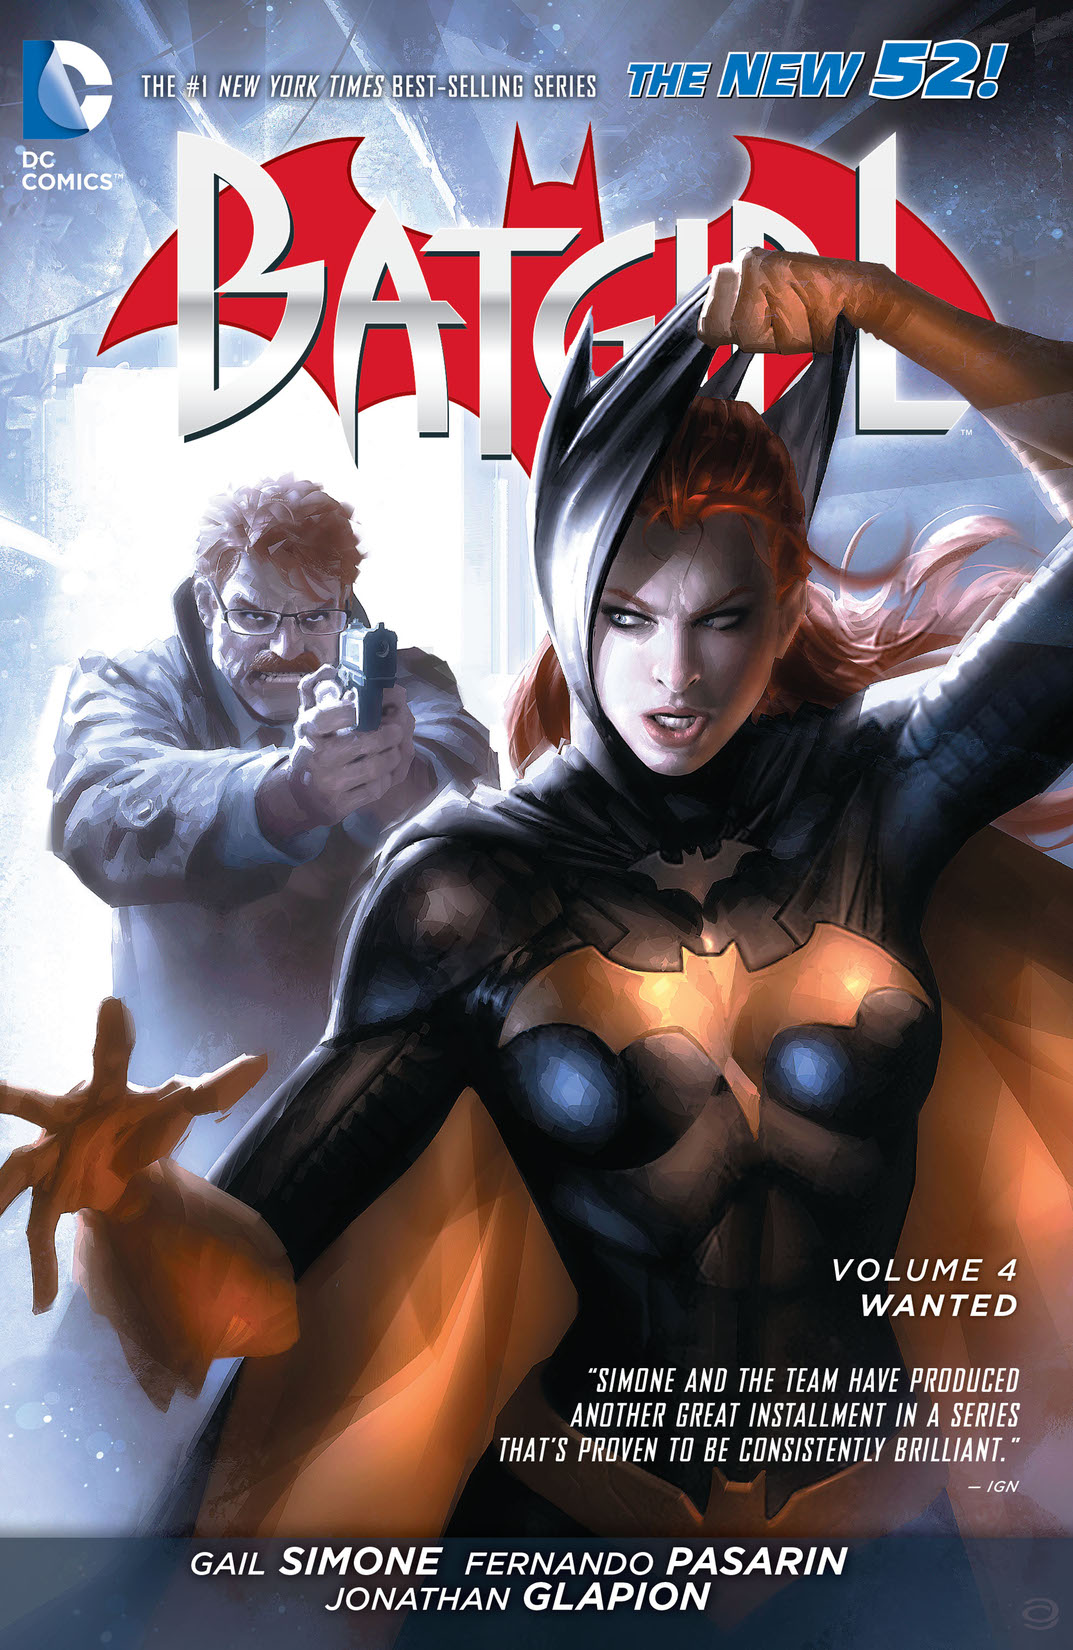 Batgirl Vol. 4: Wanted preview images